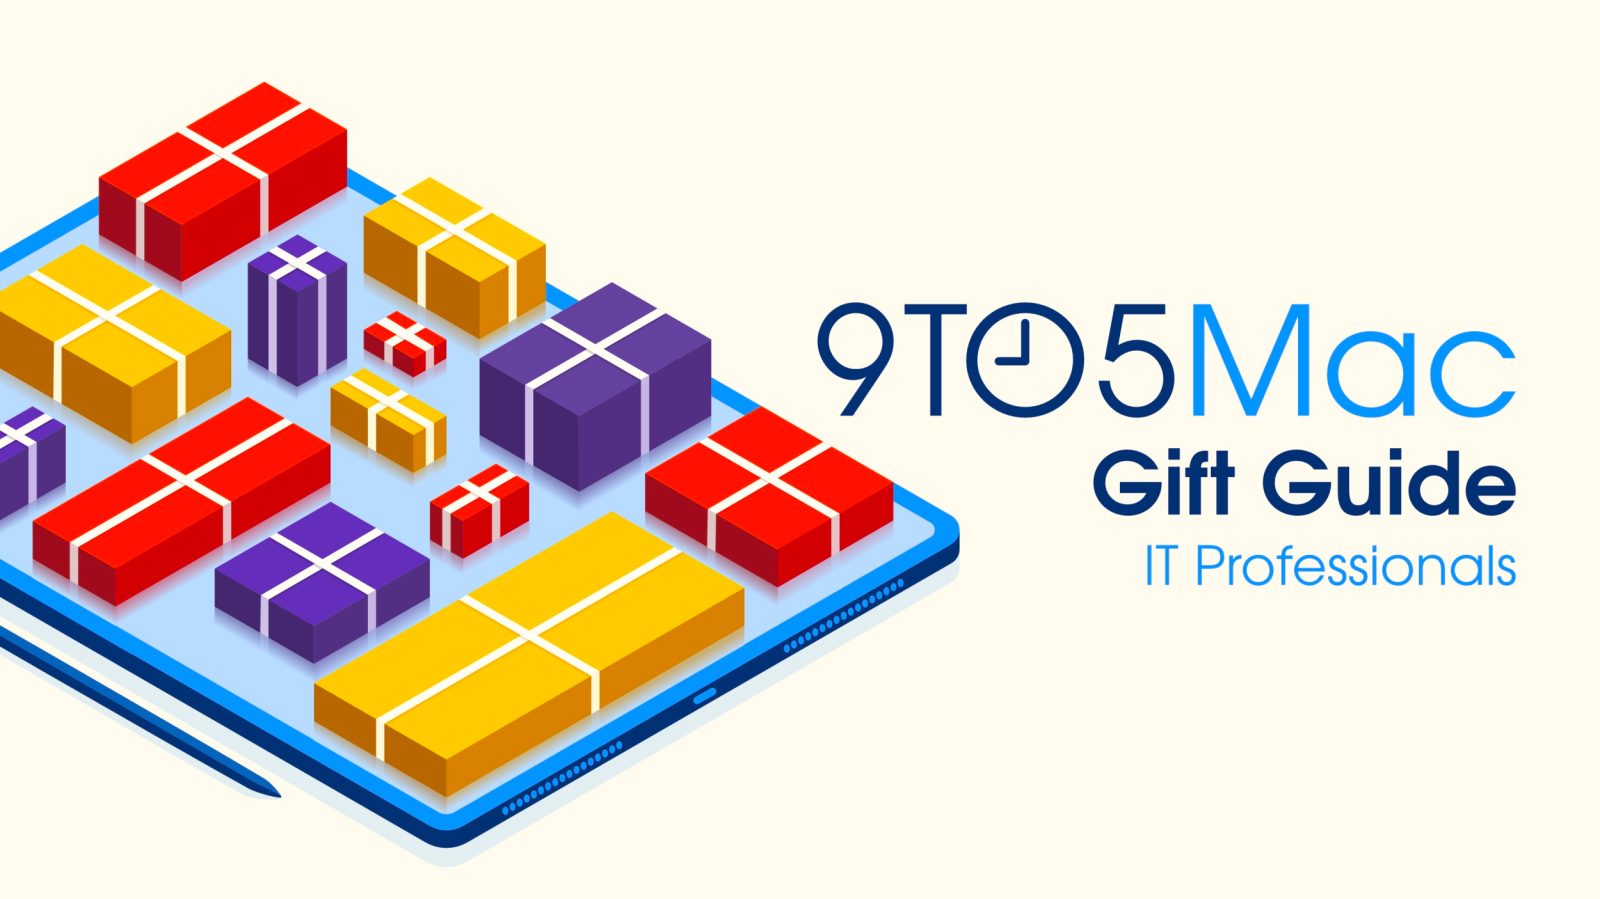 photo of 9to5Mac Gift Guide: Holiday gifts for IT professionals and tech enthusiasts image